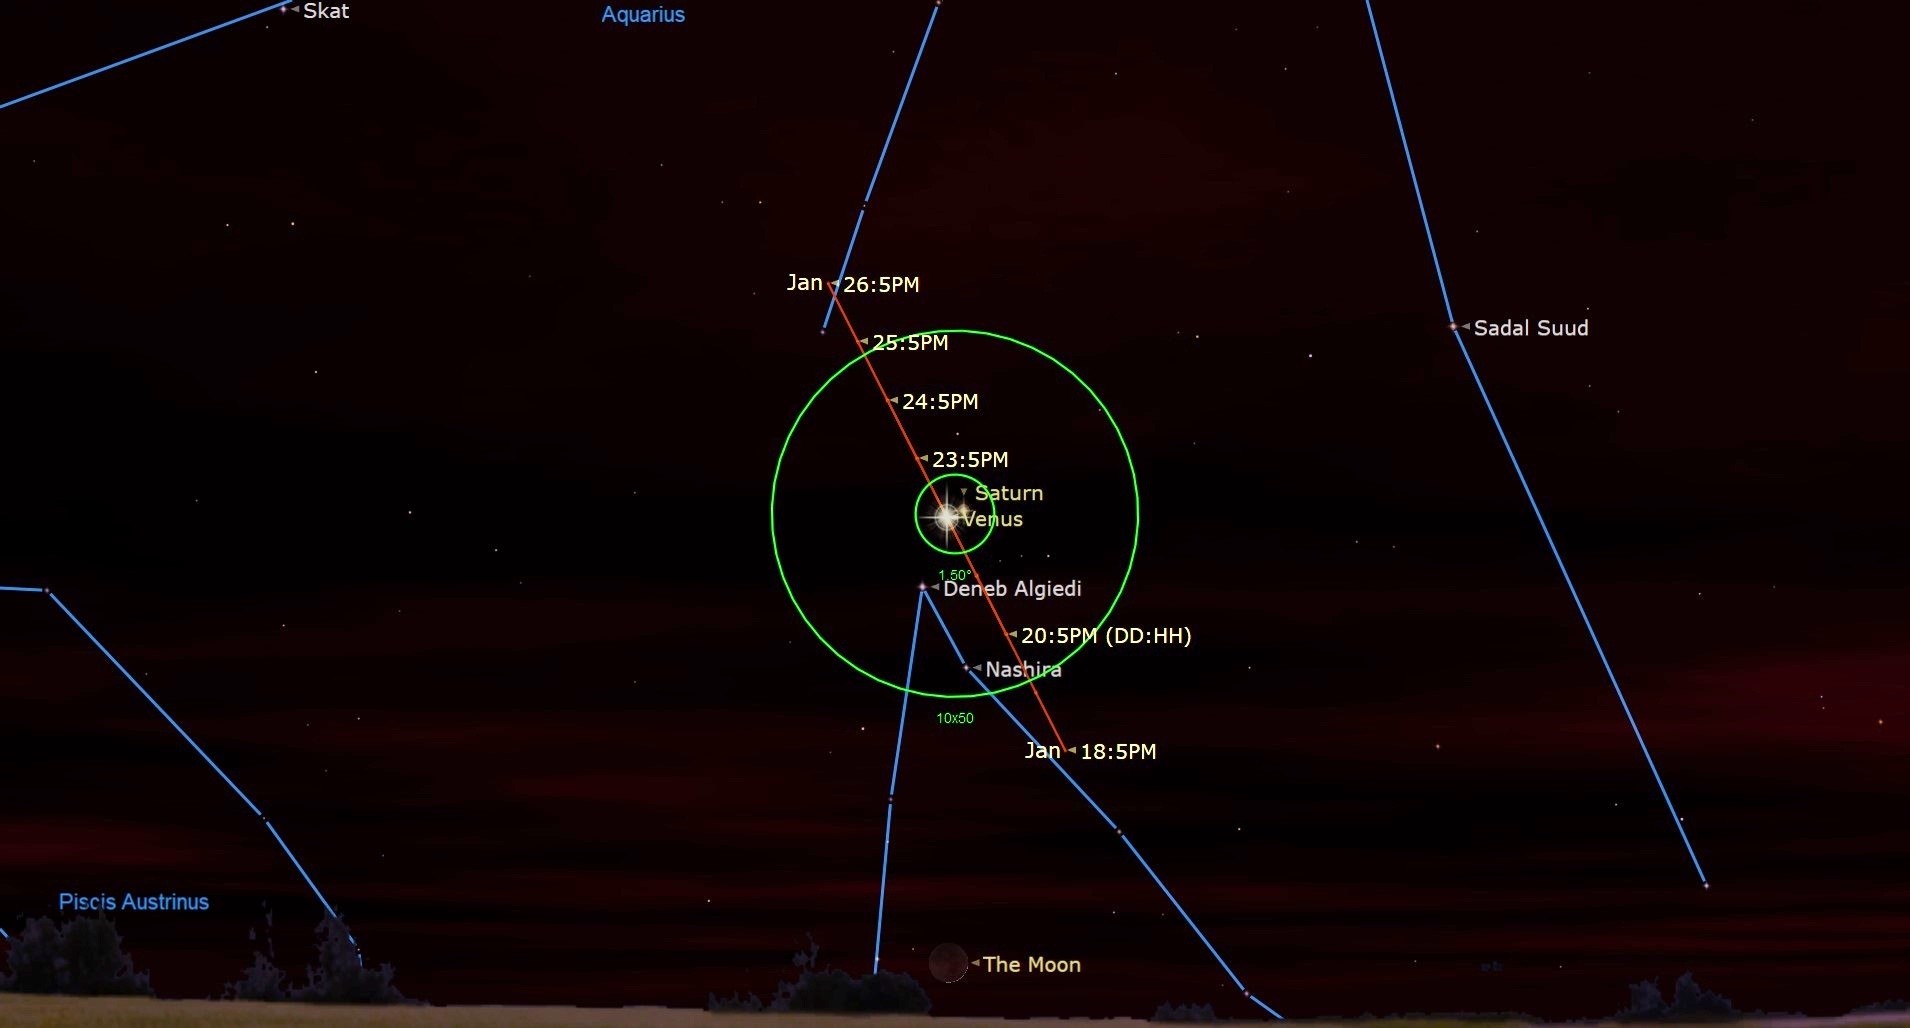 An illustration of the night sky on Jan. 22 showing the conjunction of Venus and Saturn.